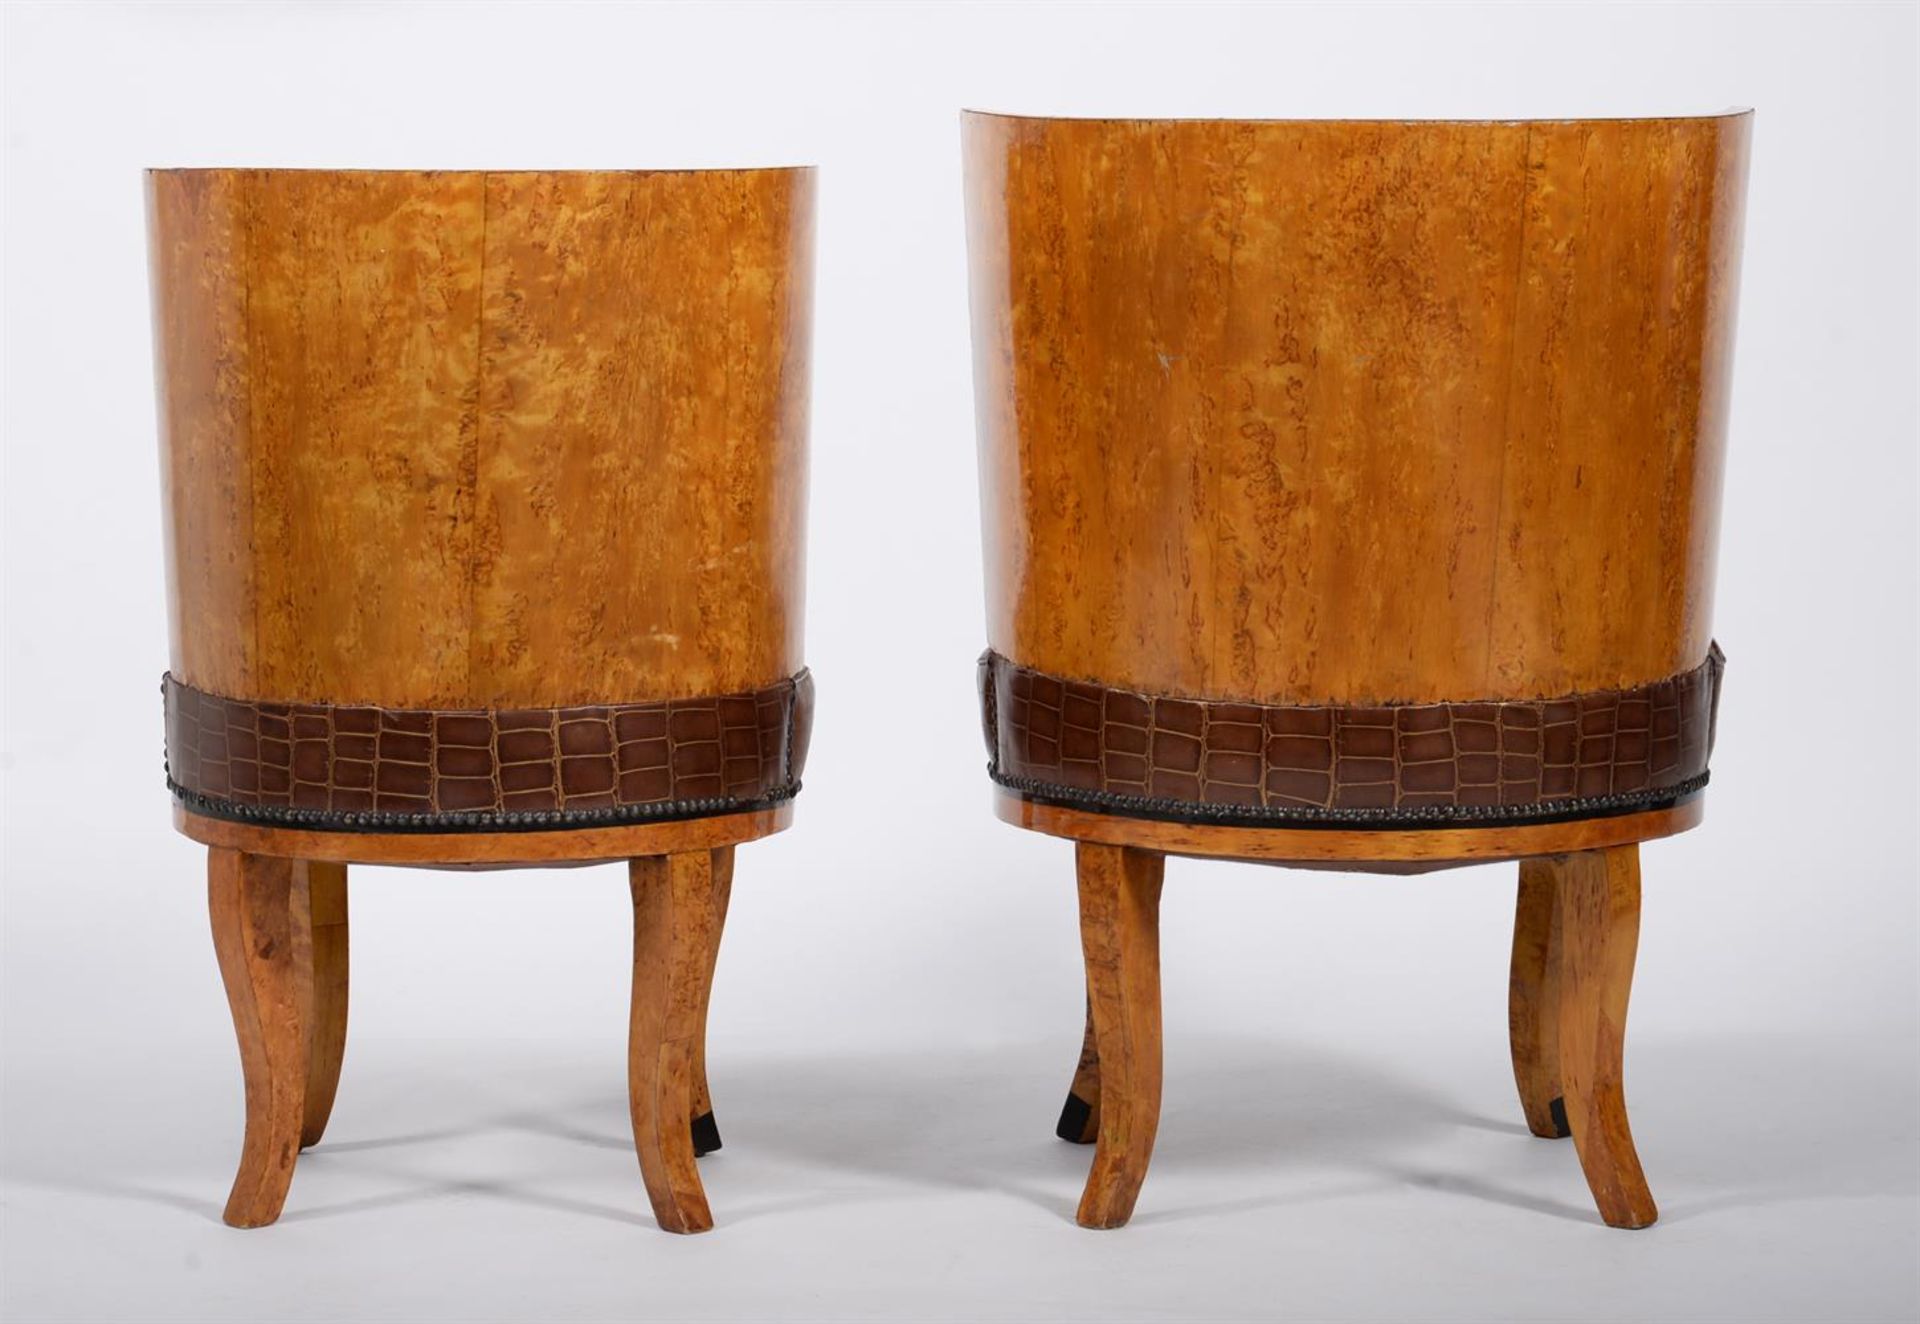 Two pairs of Russian Karelian birch and marquetry inlaid tub chairs - Image 4 of 4